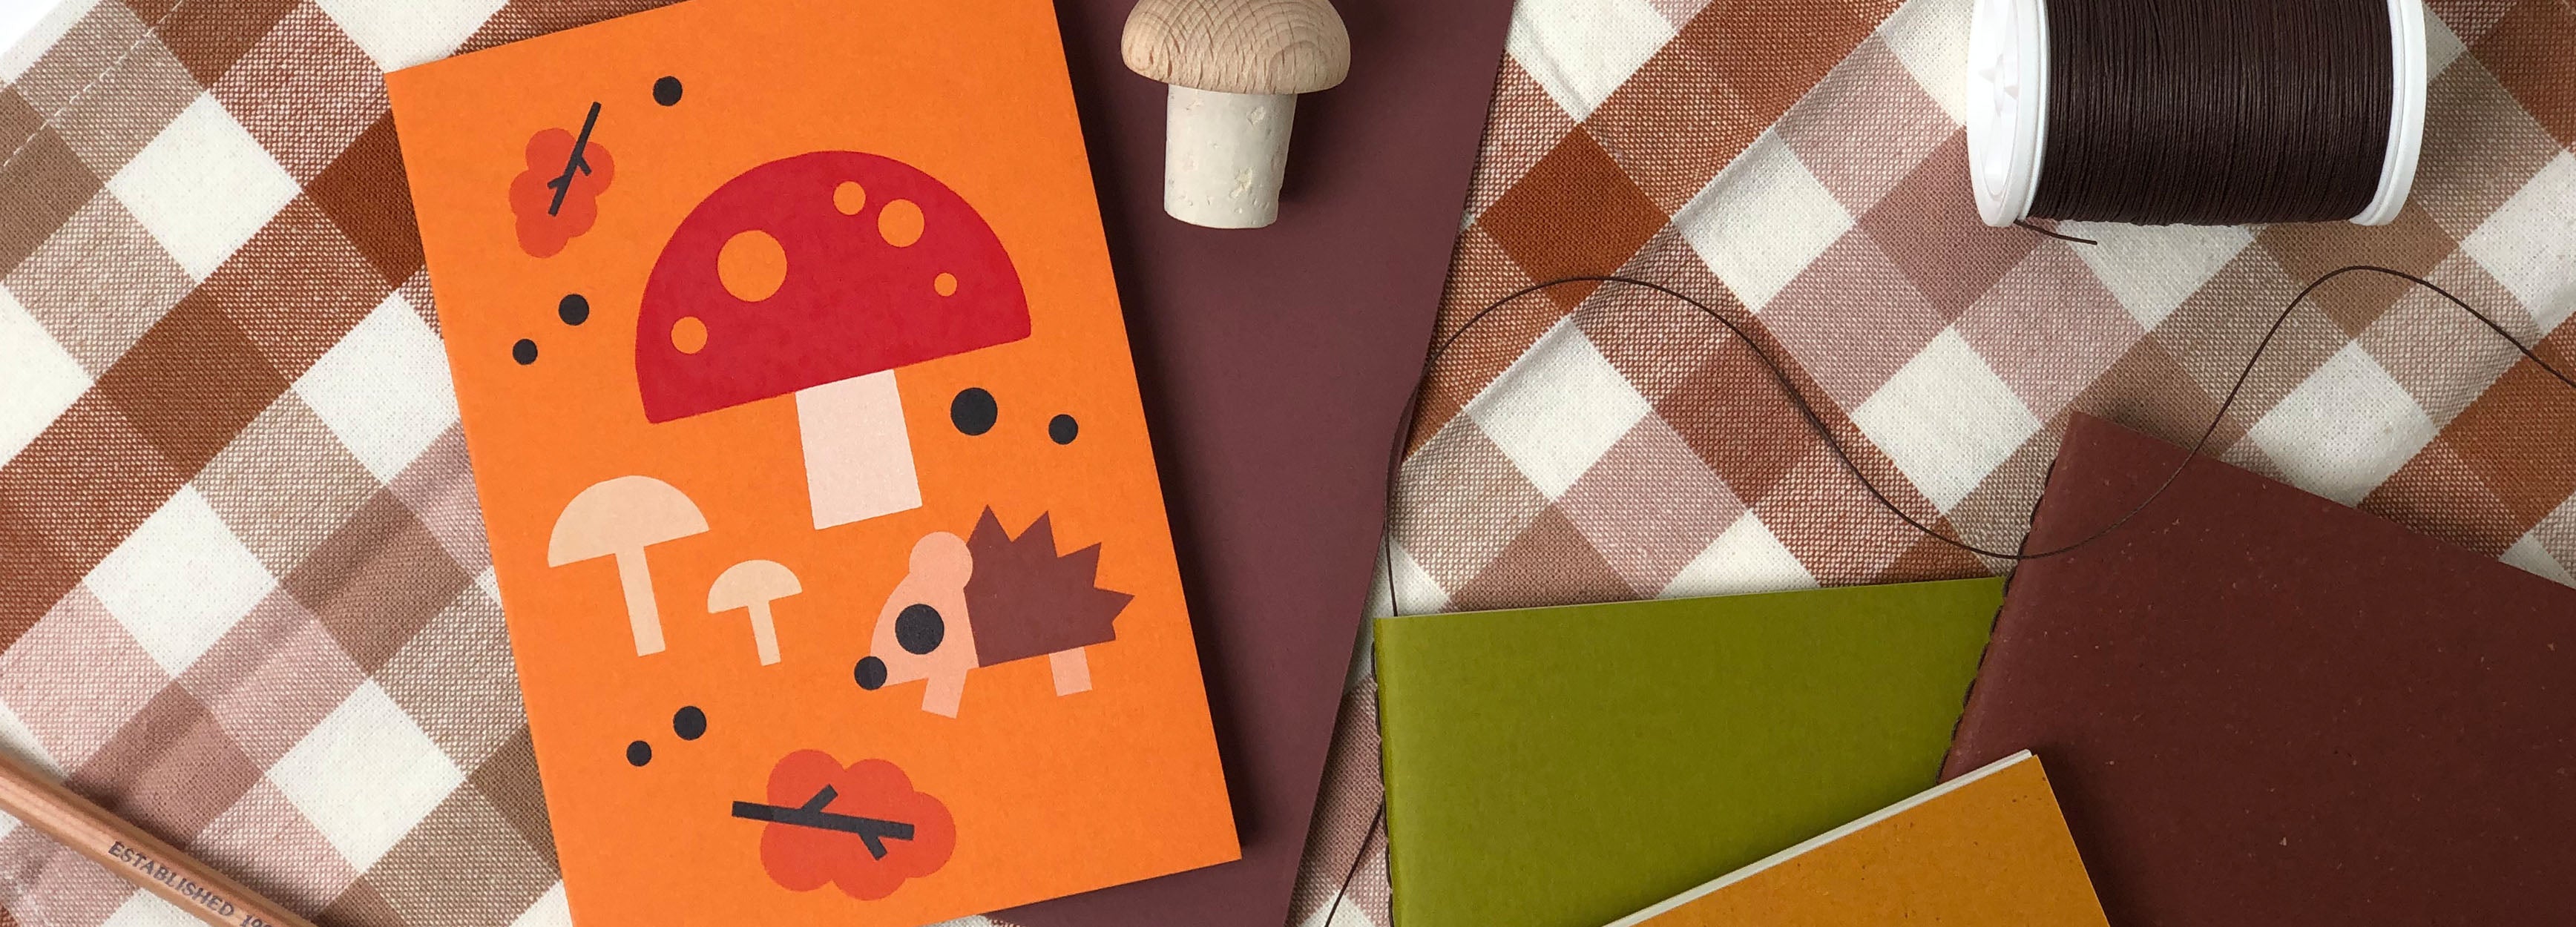 Cropped arrangement of three notebooks ranging from colors red-brown, green and yellow, an orange greeting card with illustrated hedgehog, mushrooms and leaves on a checkered cloth. Scattered are a decorative wooden mushroom, pencil and thread.